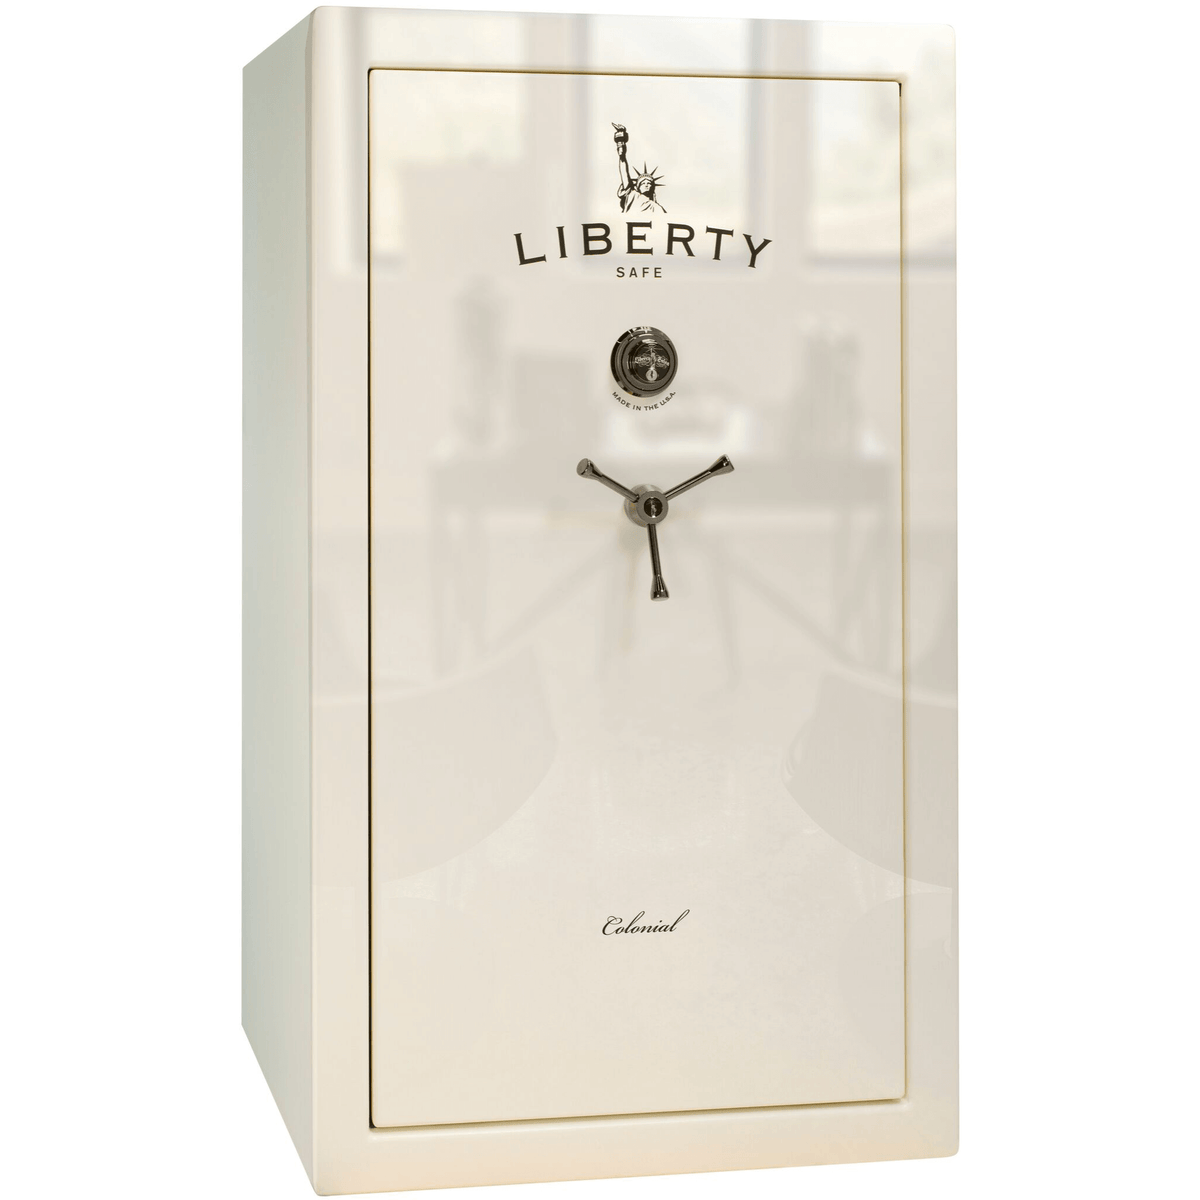 Liberty Colonial 30 Safe in White Gloss with Black Chrome Mechanical Lock.